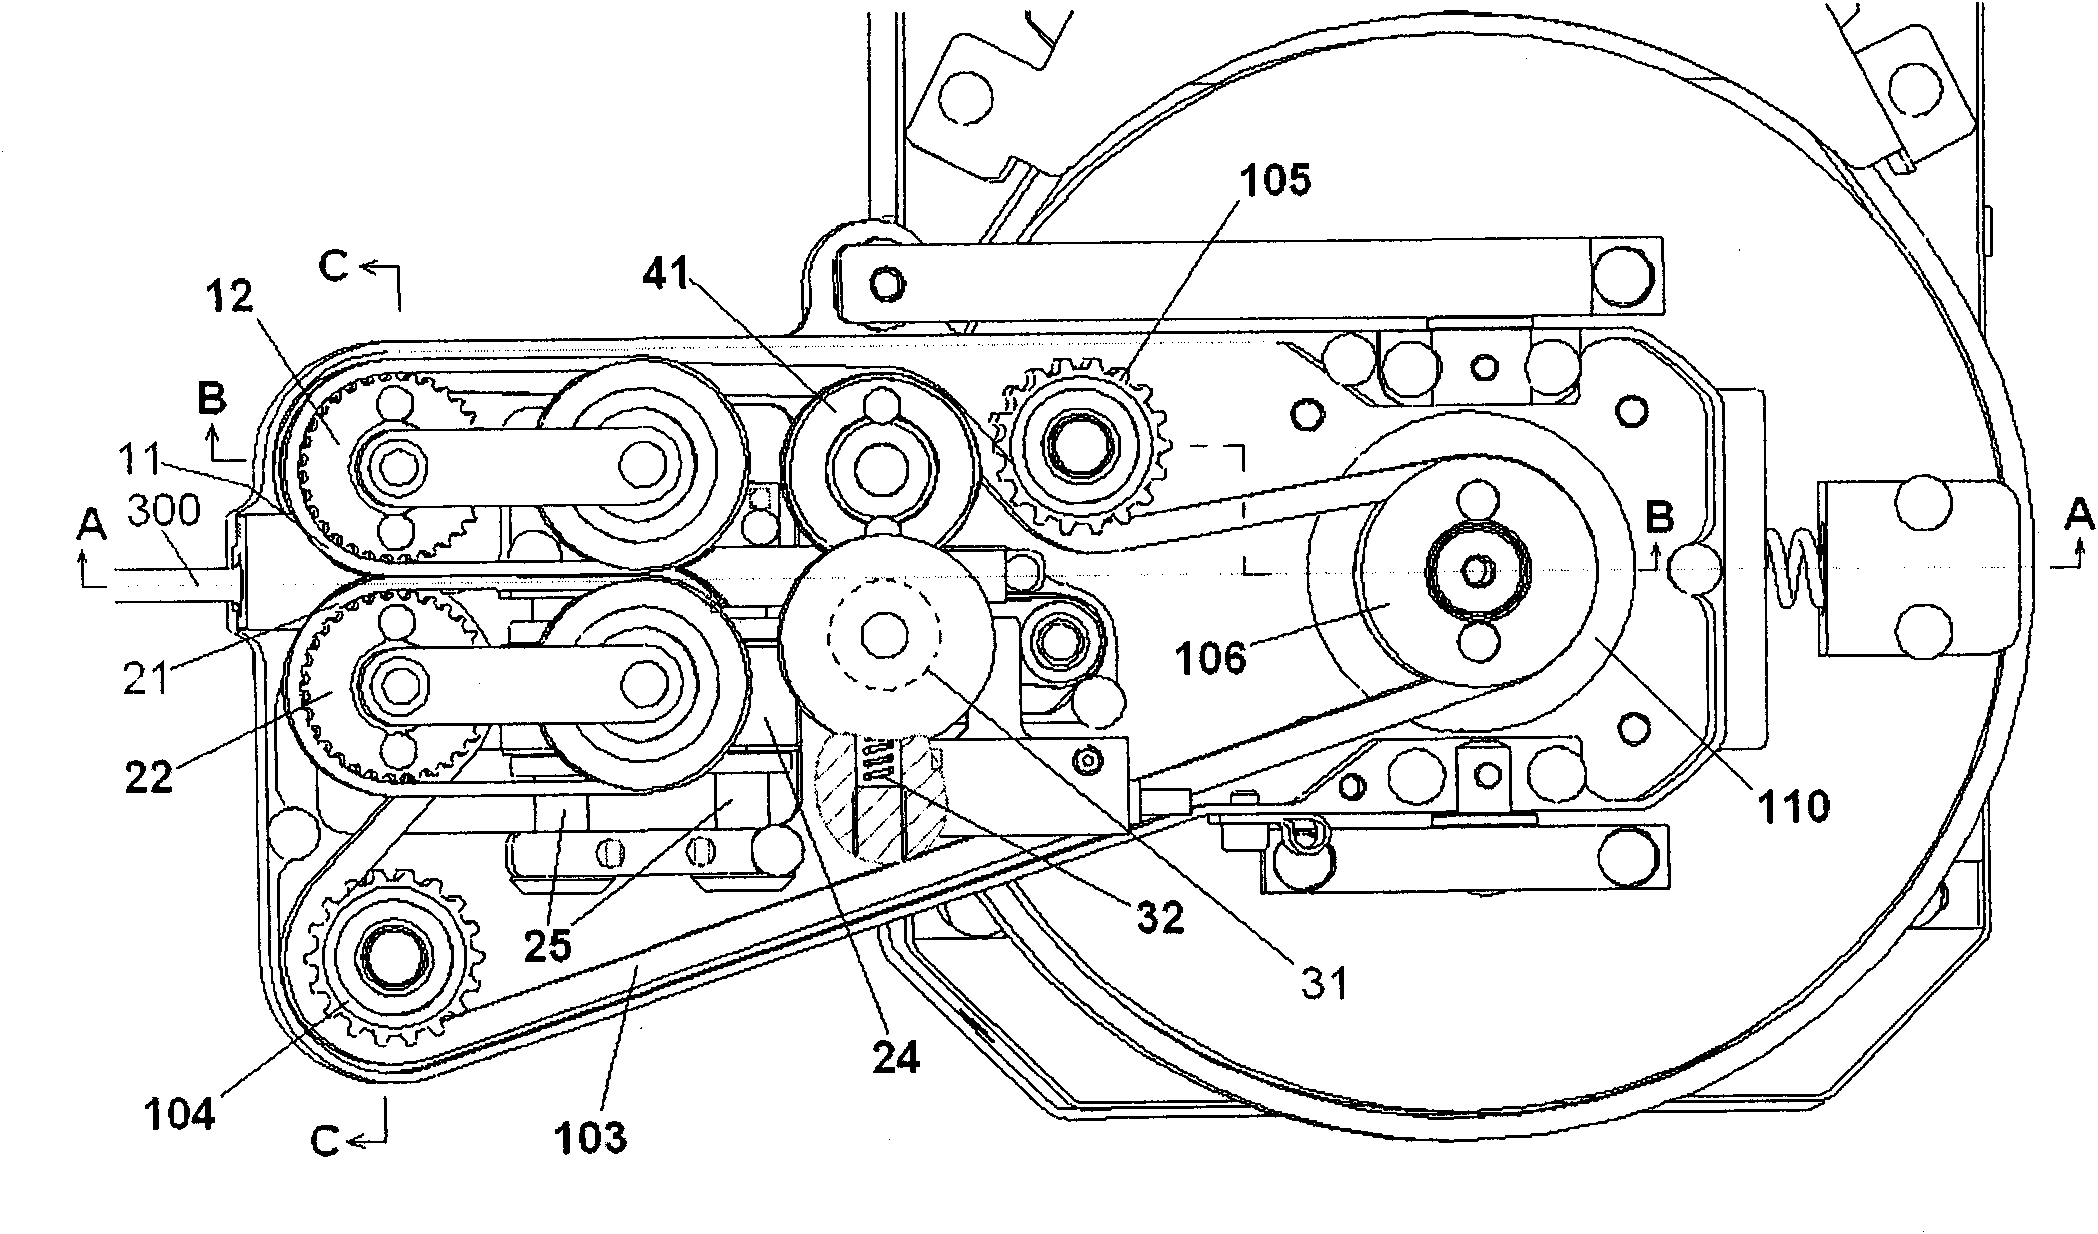 Cable supplying and rotating system